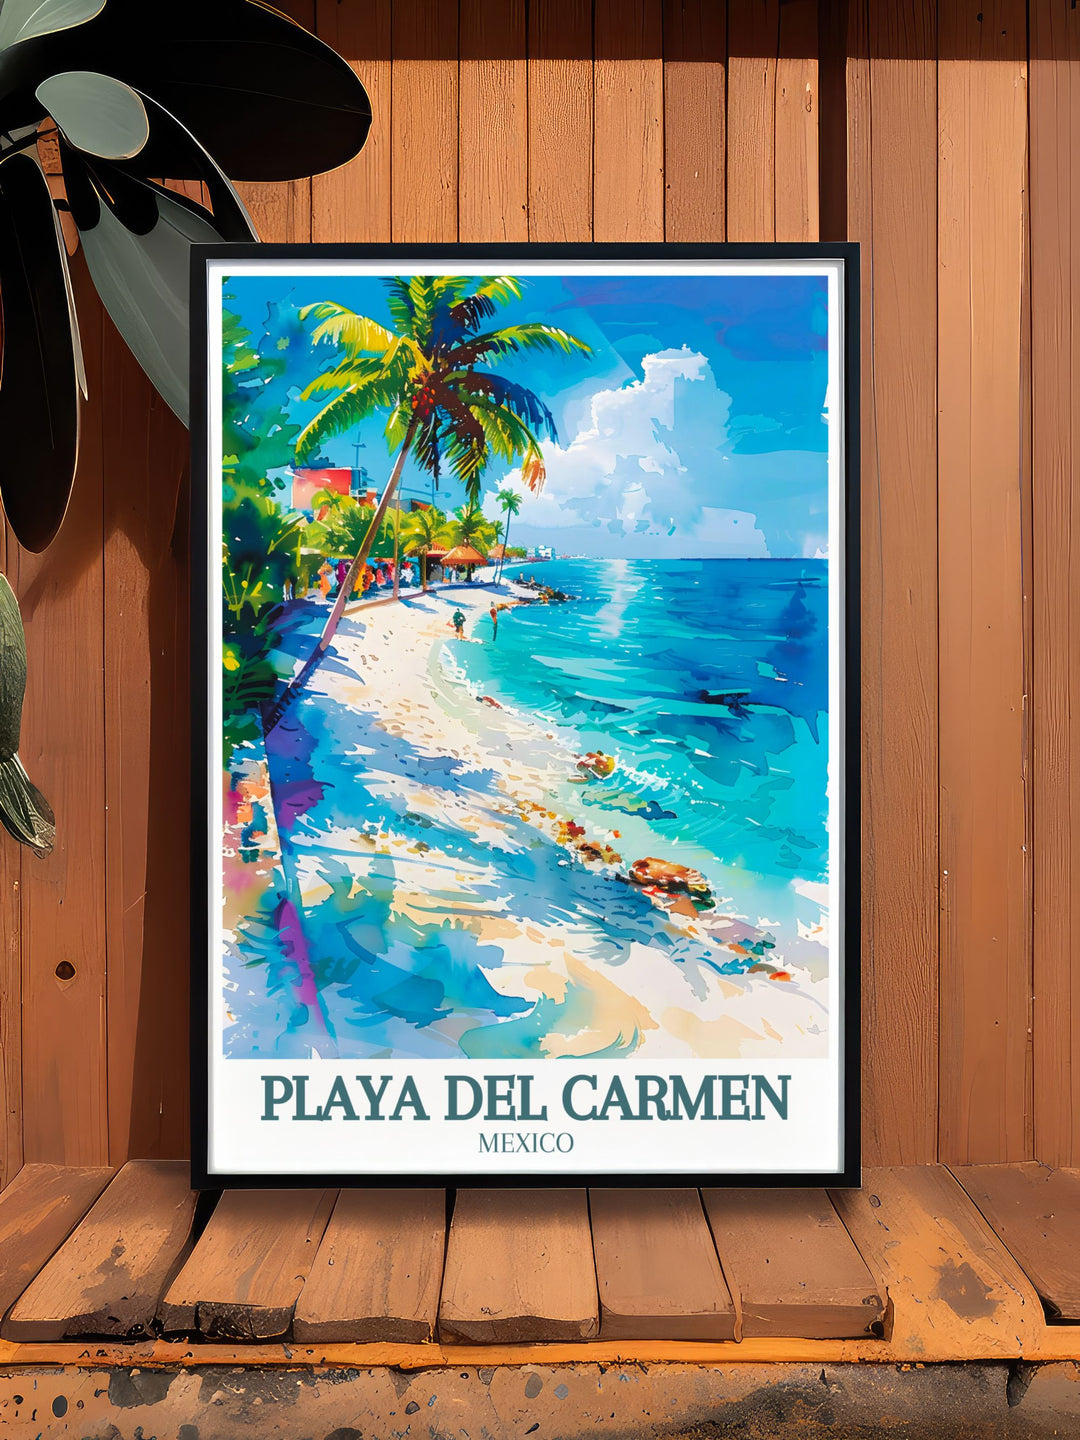 Enhance your home with this captivating Playa Carmen print featuring the Caribbean Sea. The vivid colors and intricate details make this Mexico wall art a standout piece ideal for those who love travel and coastal scenery.